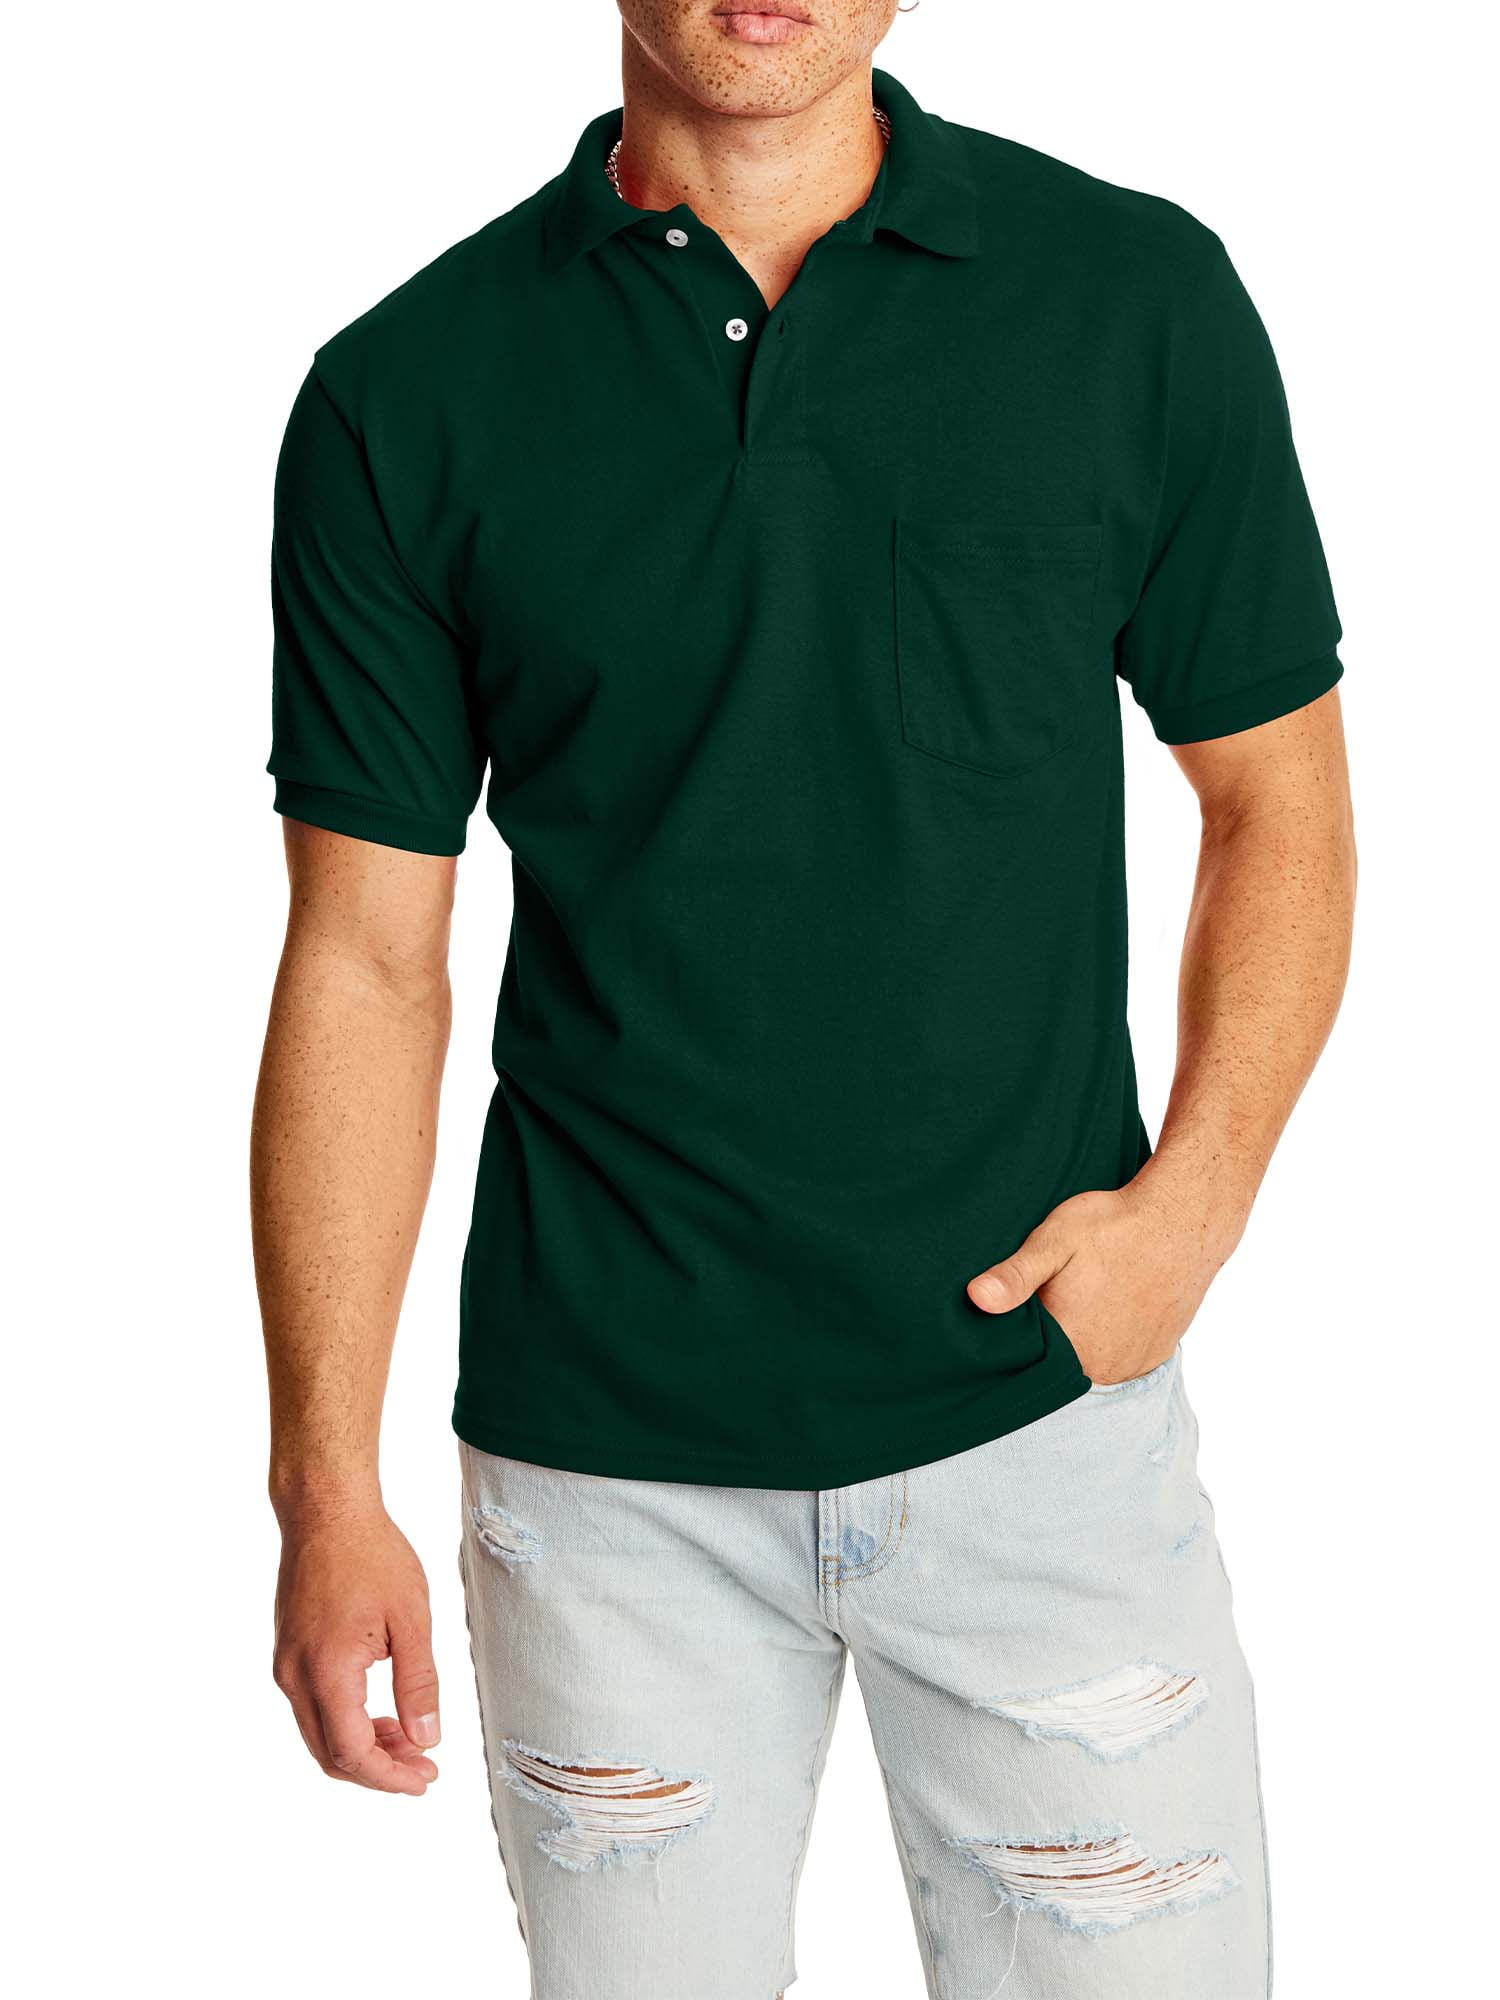 Platoon Mens Regular Fit Striped Short Sleeve Polo Shirt with Pocket 11 Colors